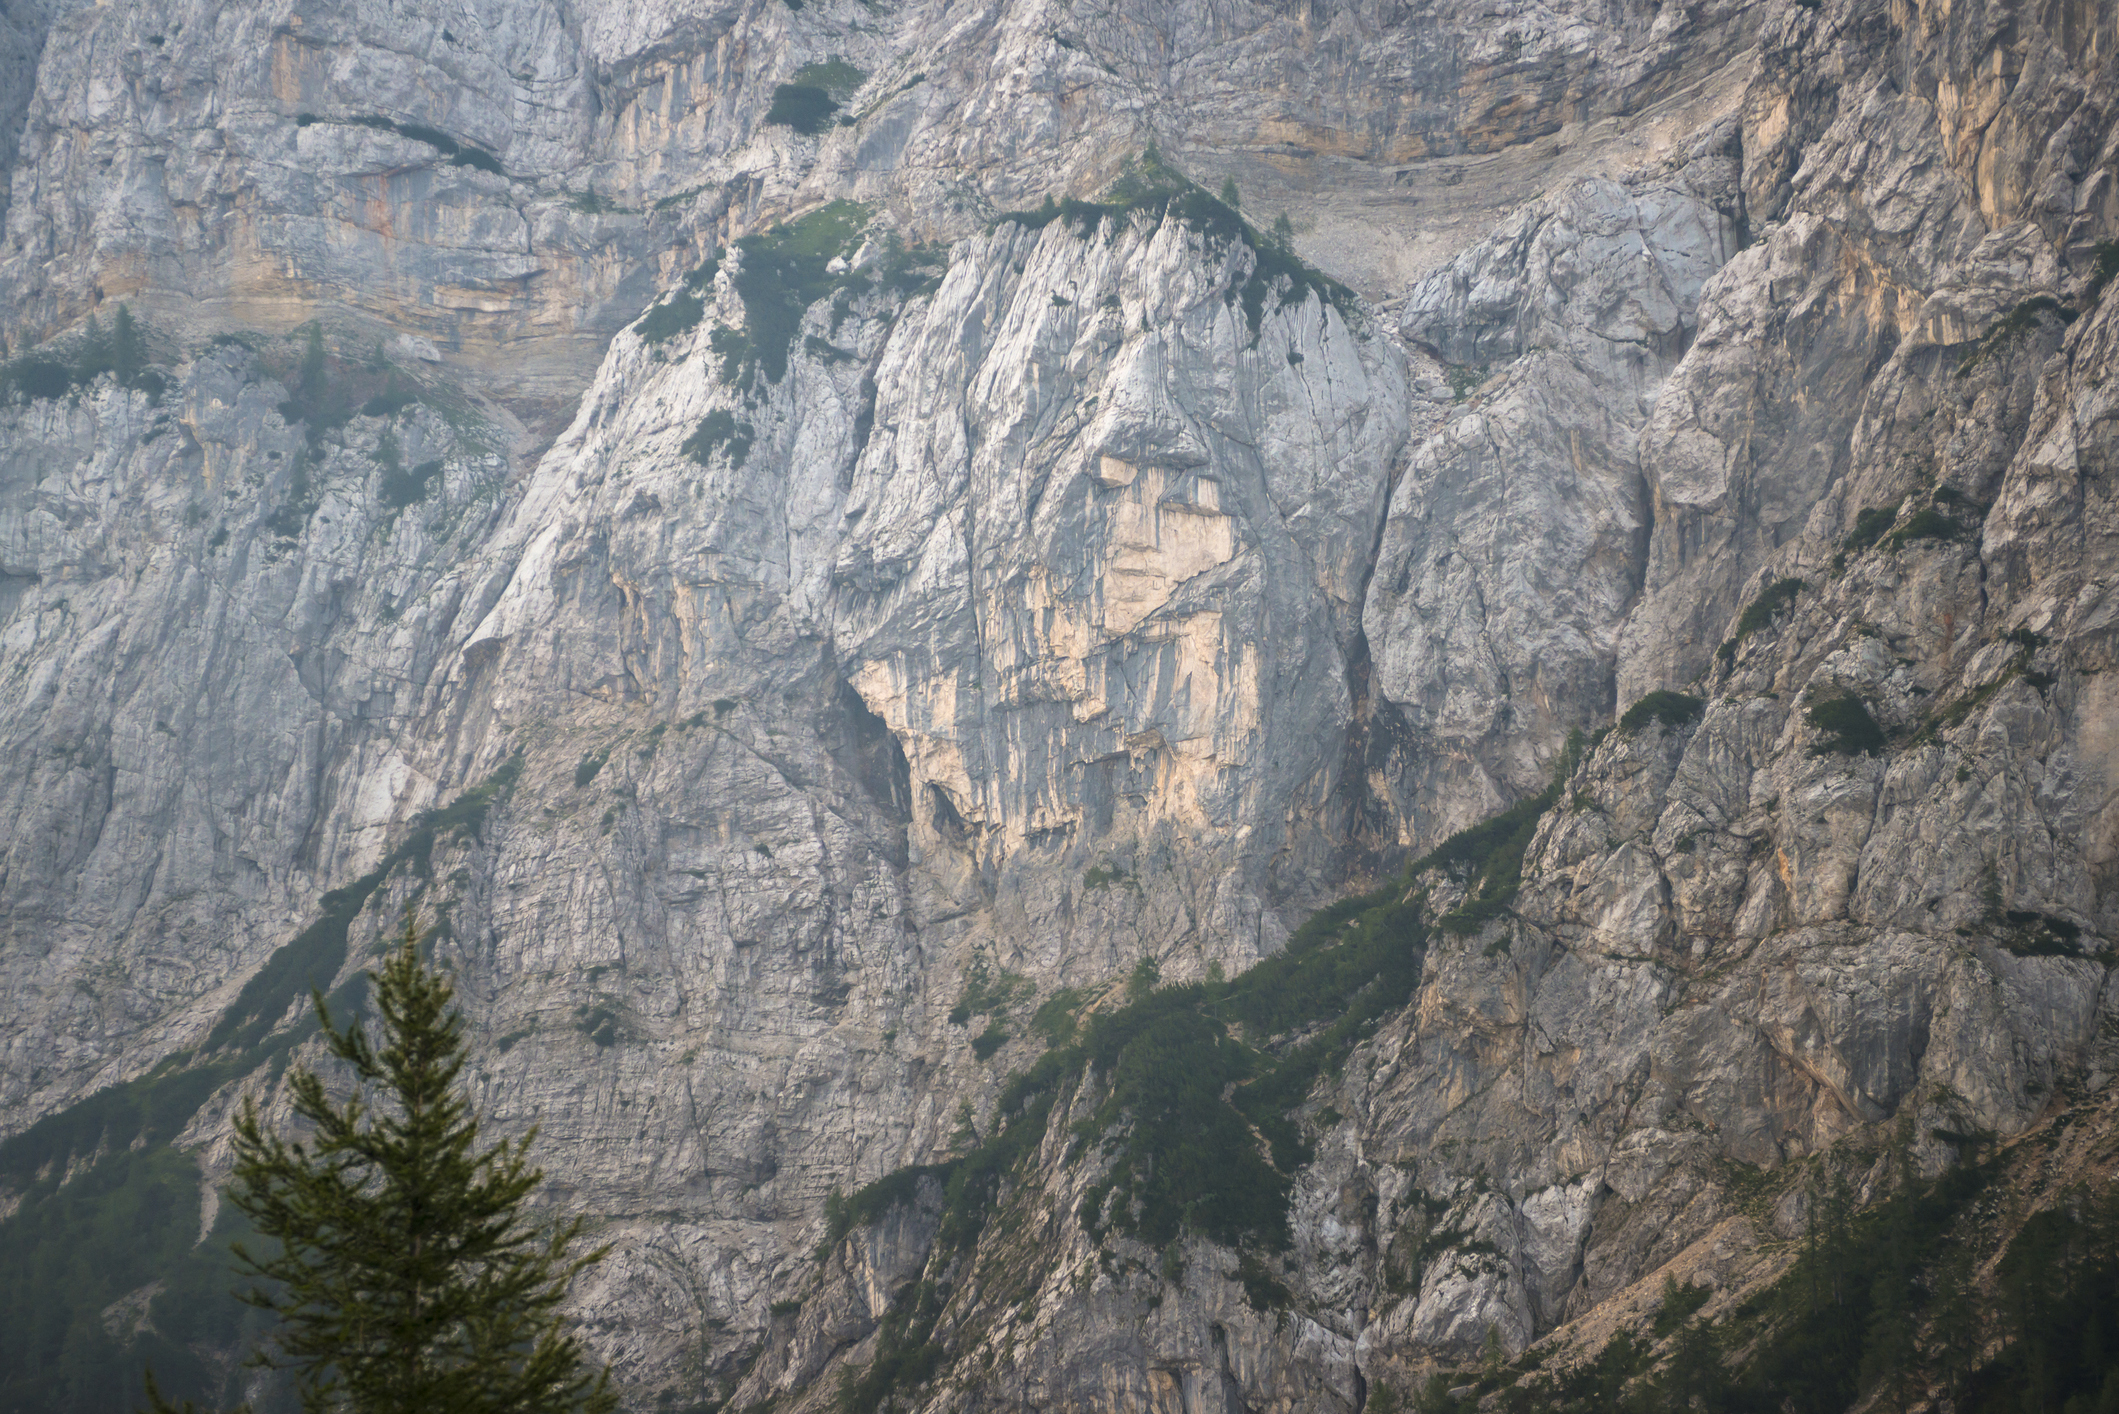 Pagan GIrl's face carved into the mountain